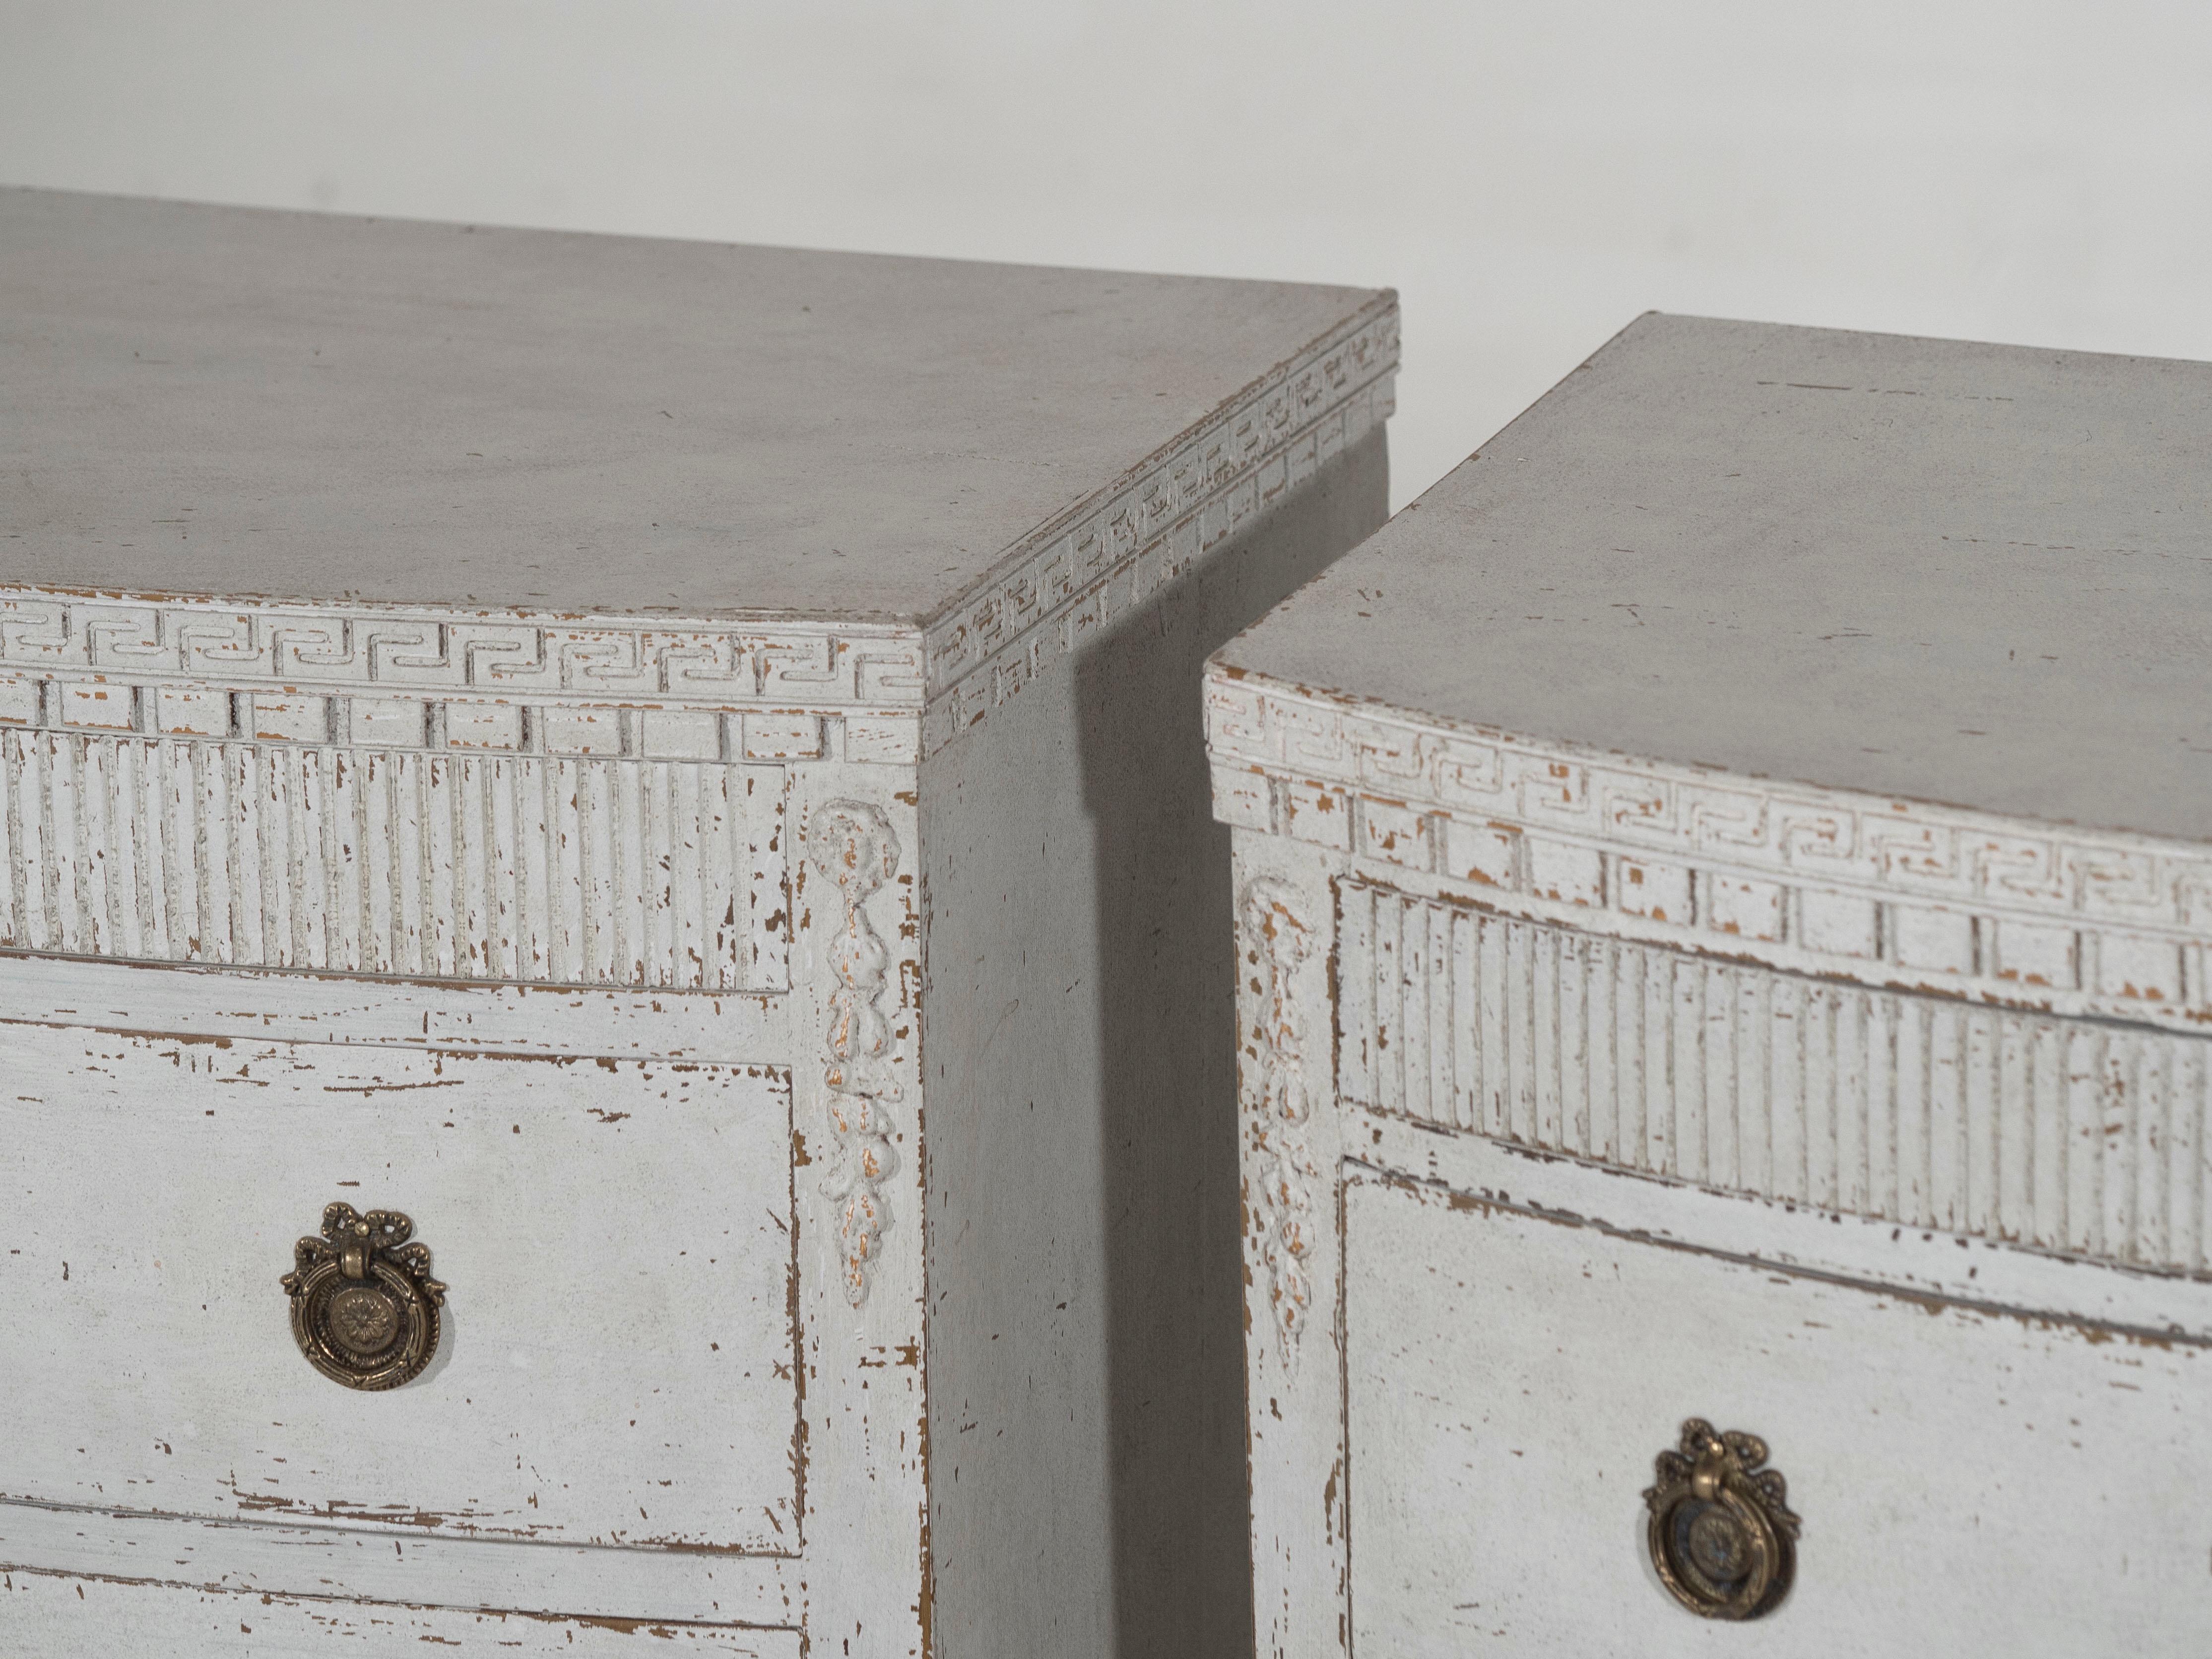 Elegant set of gustavian style chests featuring a gracefully curved front and carvings, circa 100 years old.